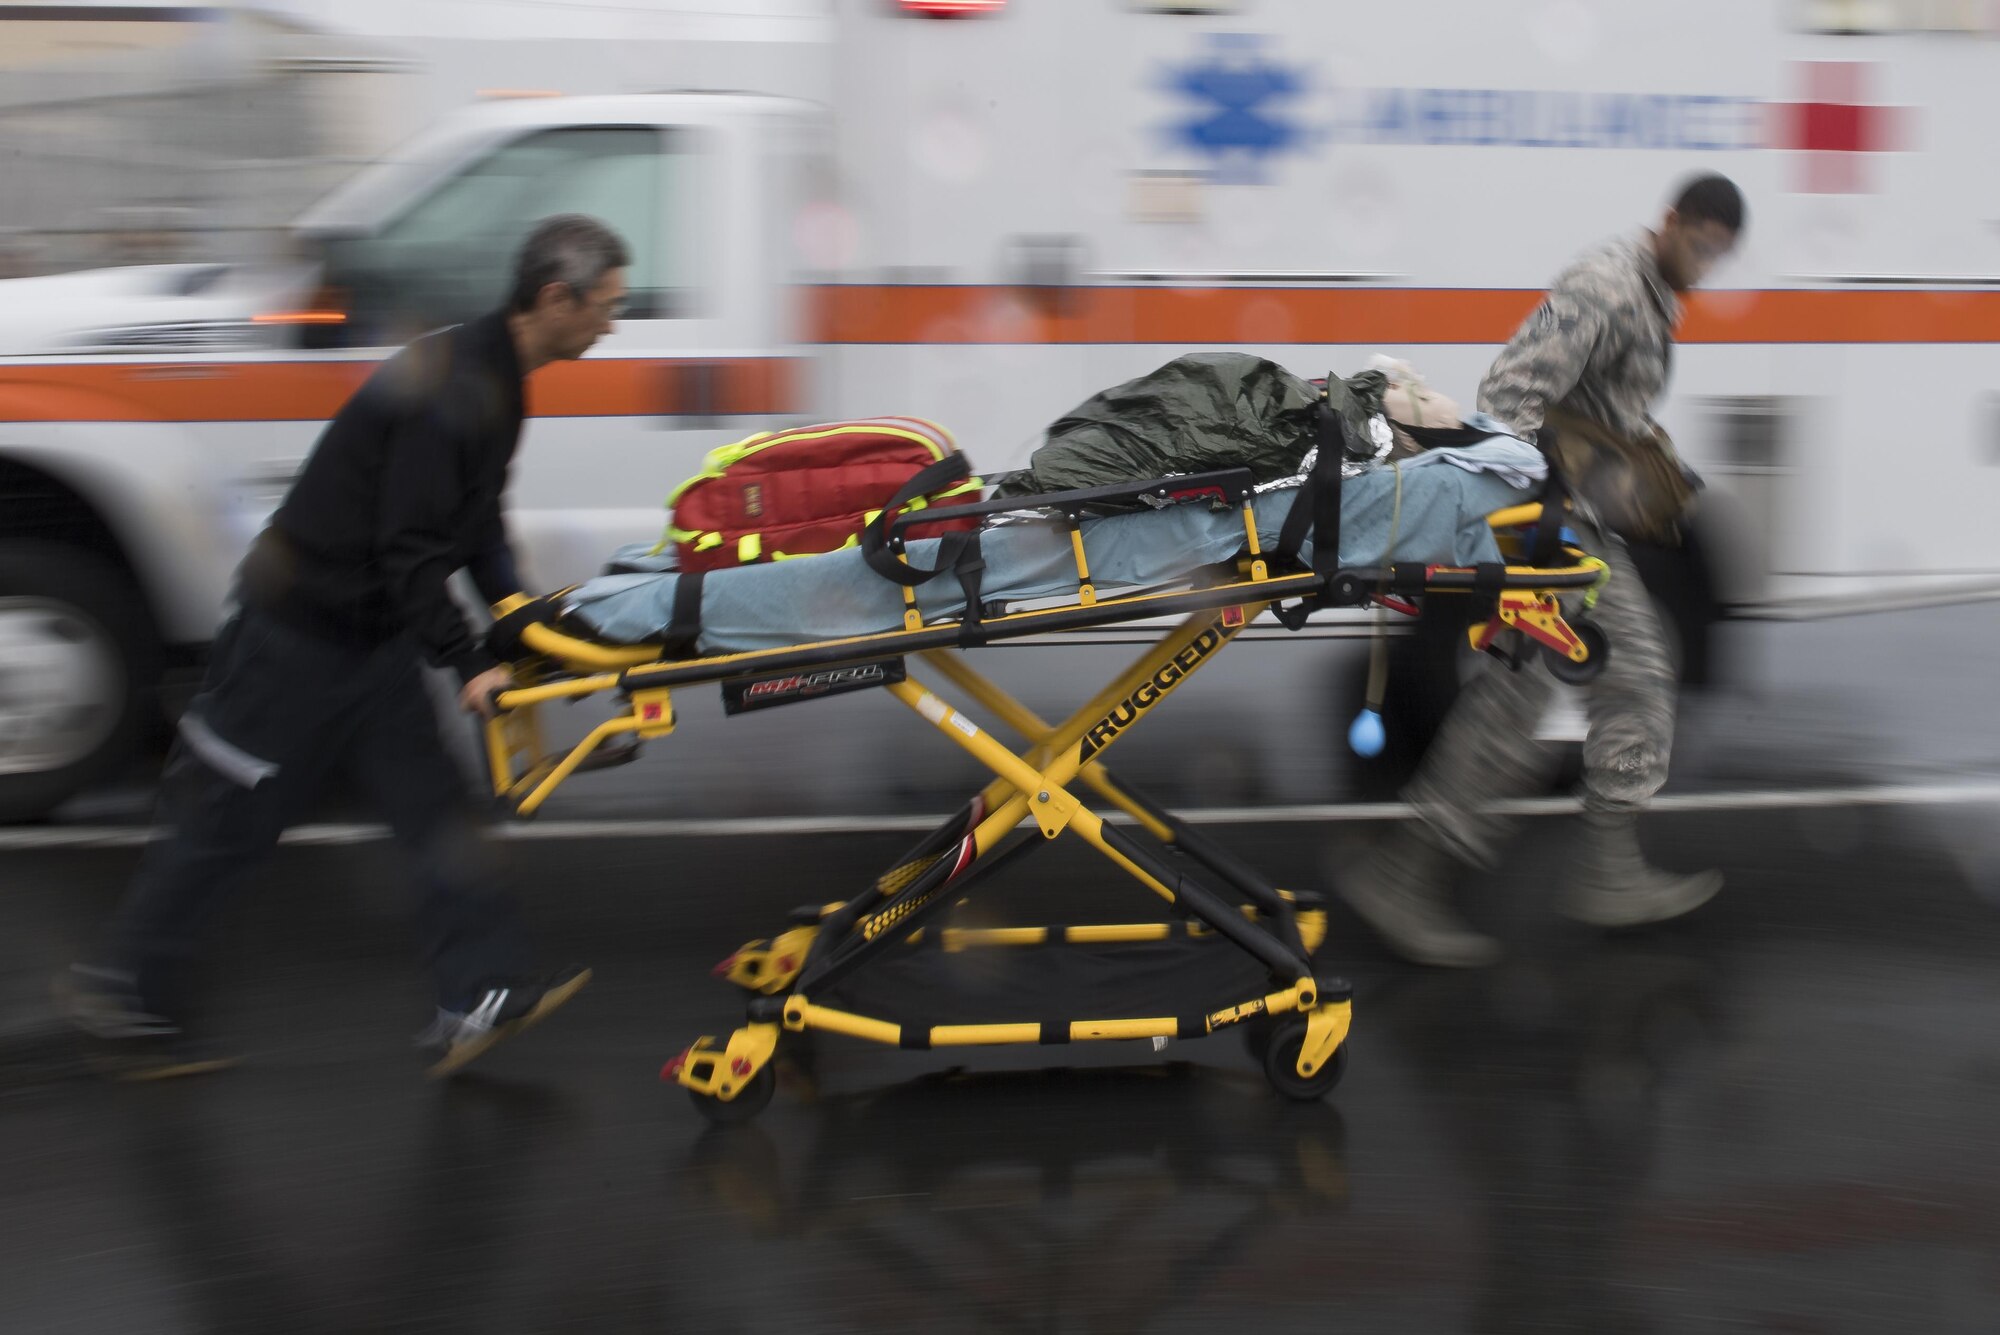 Emergency responders from the 374th Medical Group transport a simulated victim during an active shooter exercise, Aug. 16, 2017, at Yokota Air Base, Japan. The top priority after an active shooter event is tending to victims to prevent further loss of life. (U.S. Air Force photo by Airman 1st Class Donald Hudson)